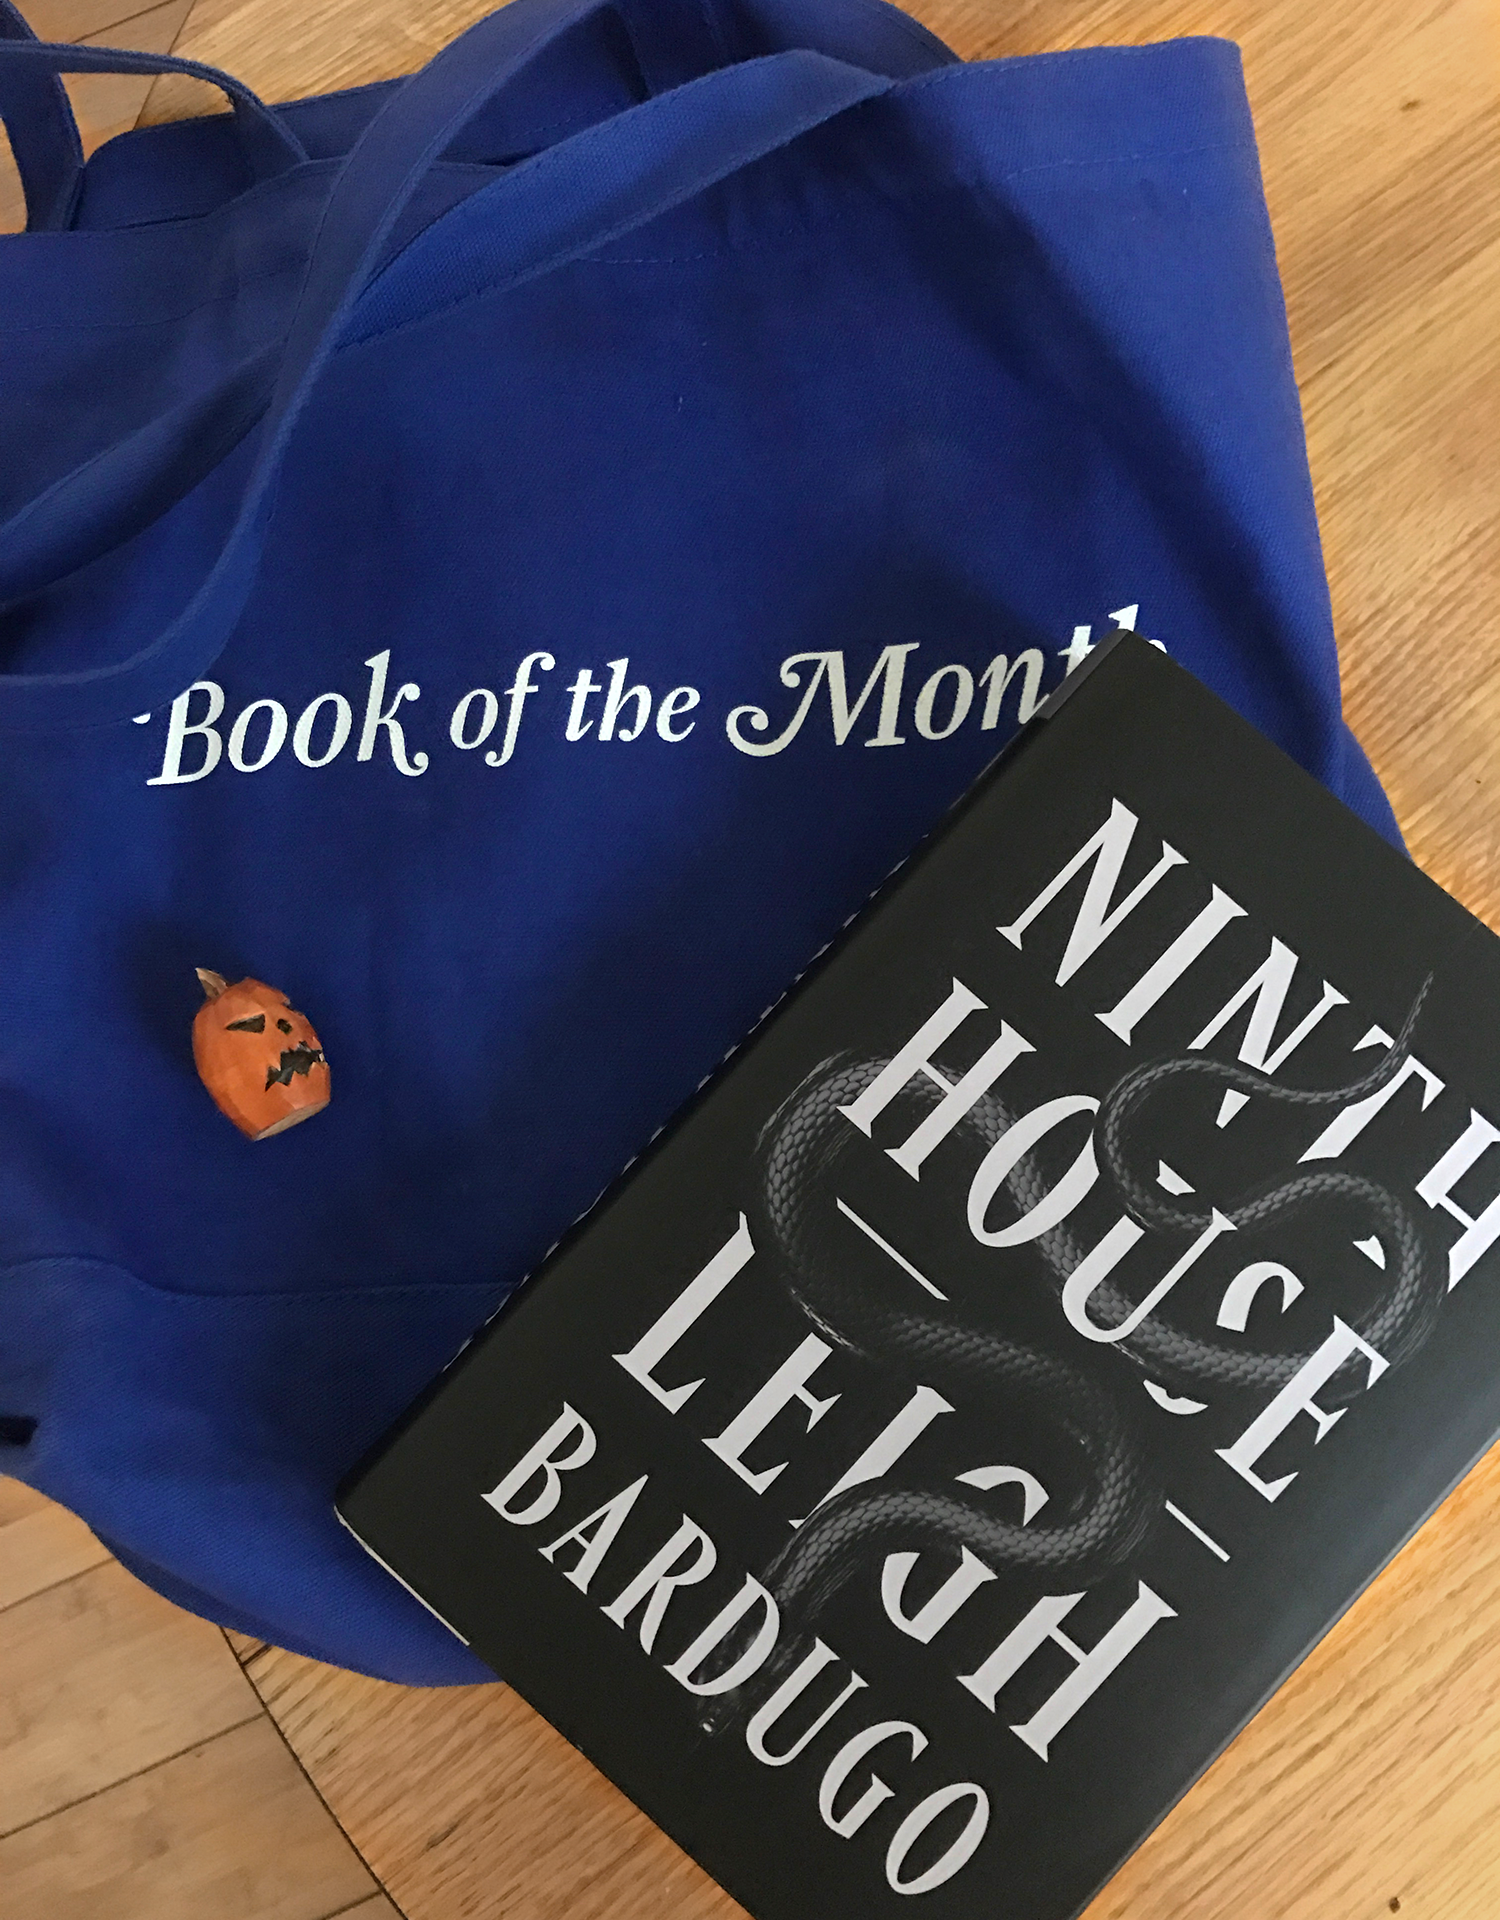 buzzfeed editor&#x27;s book of the month tote bag and the book ninth house by leigh barugo